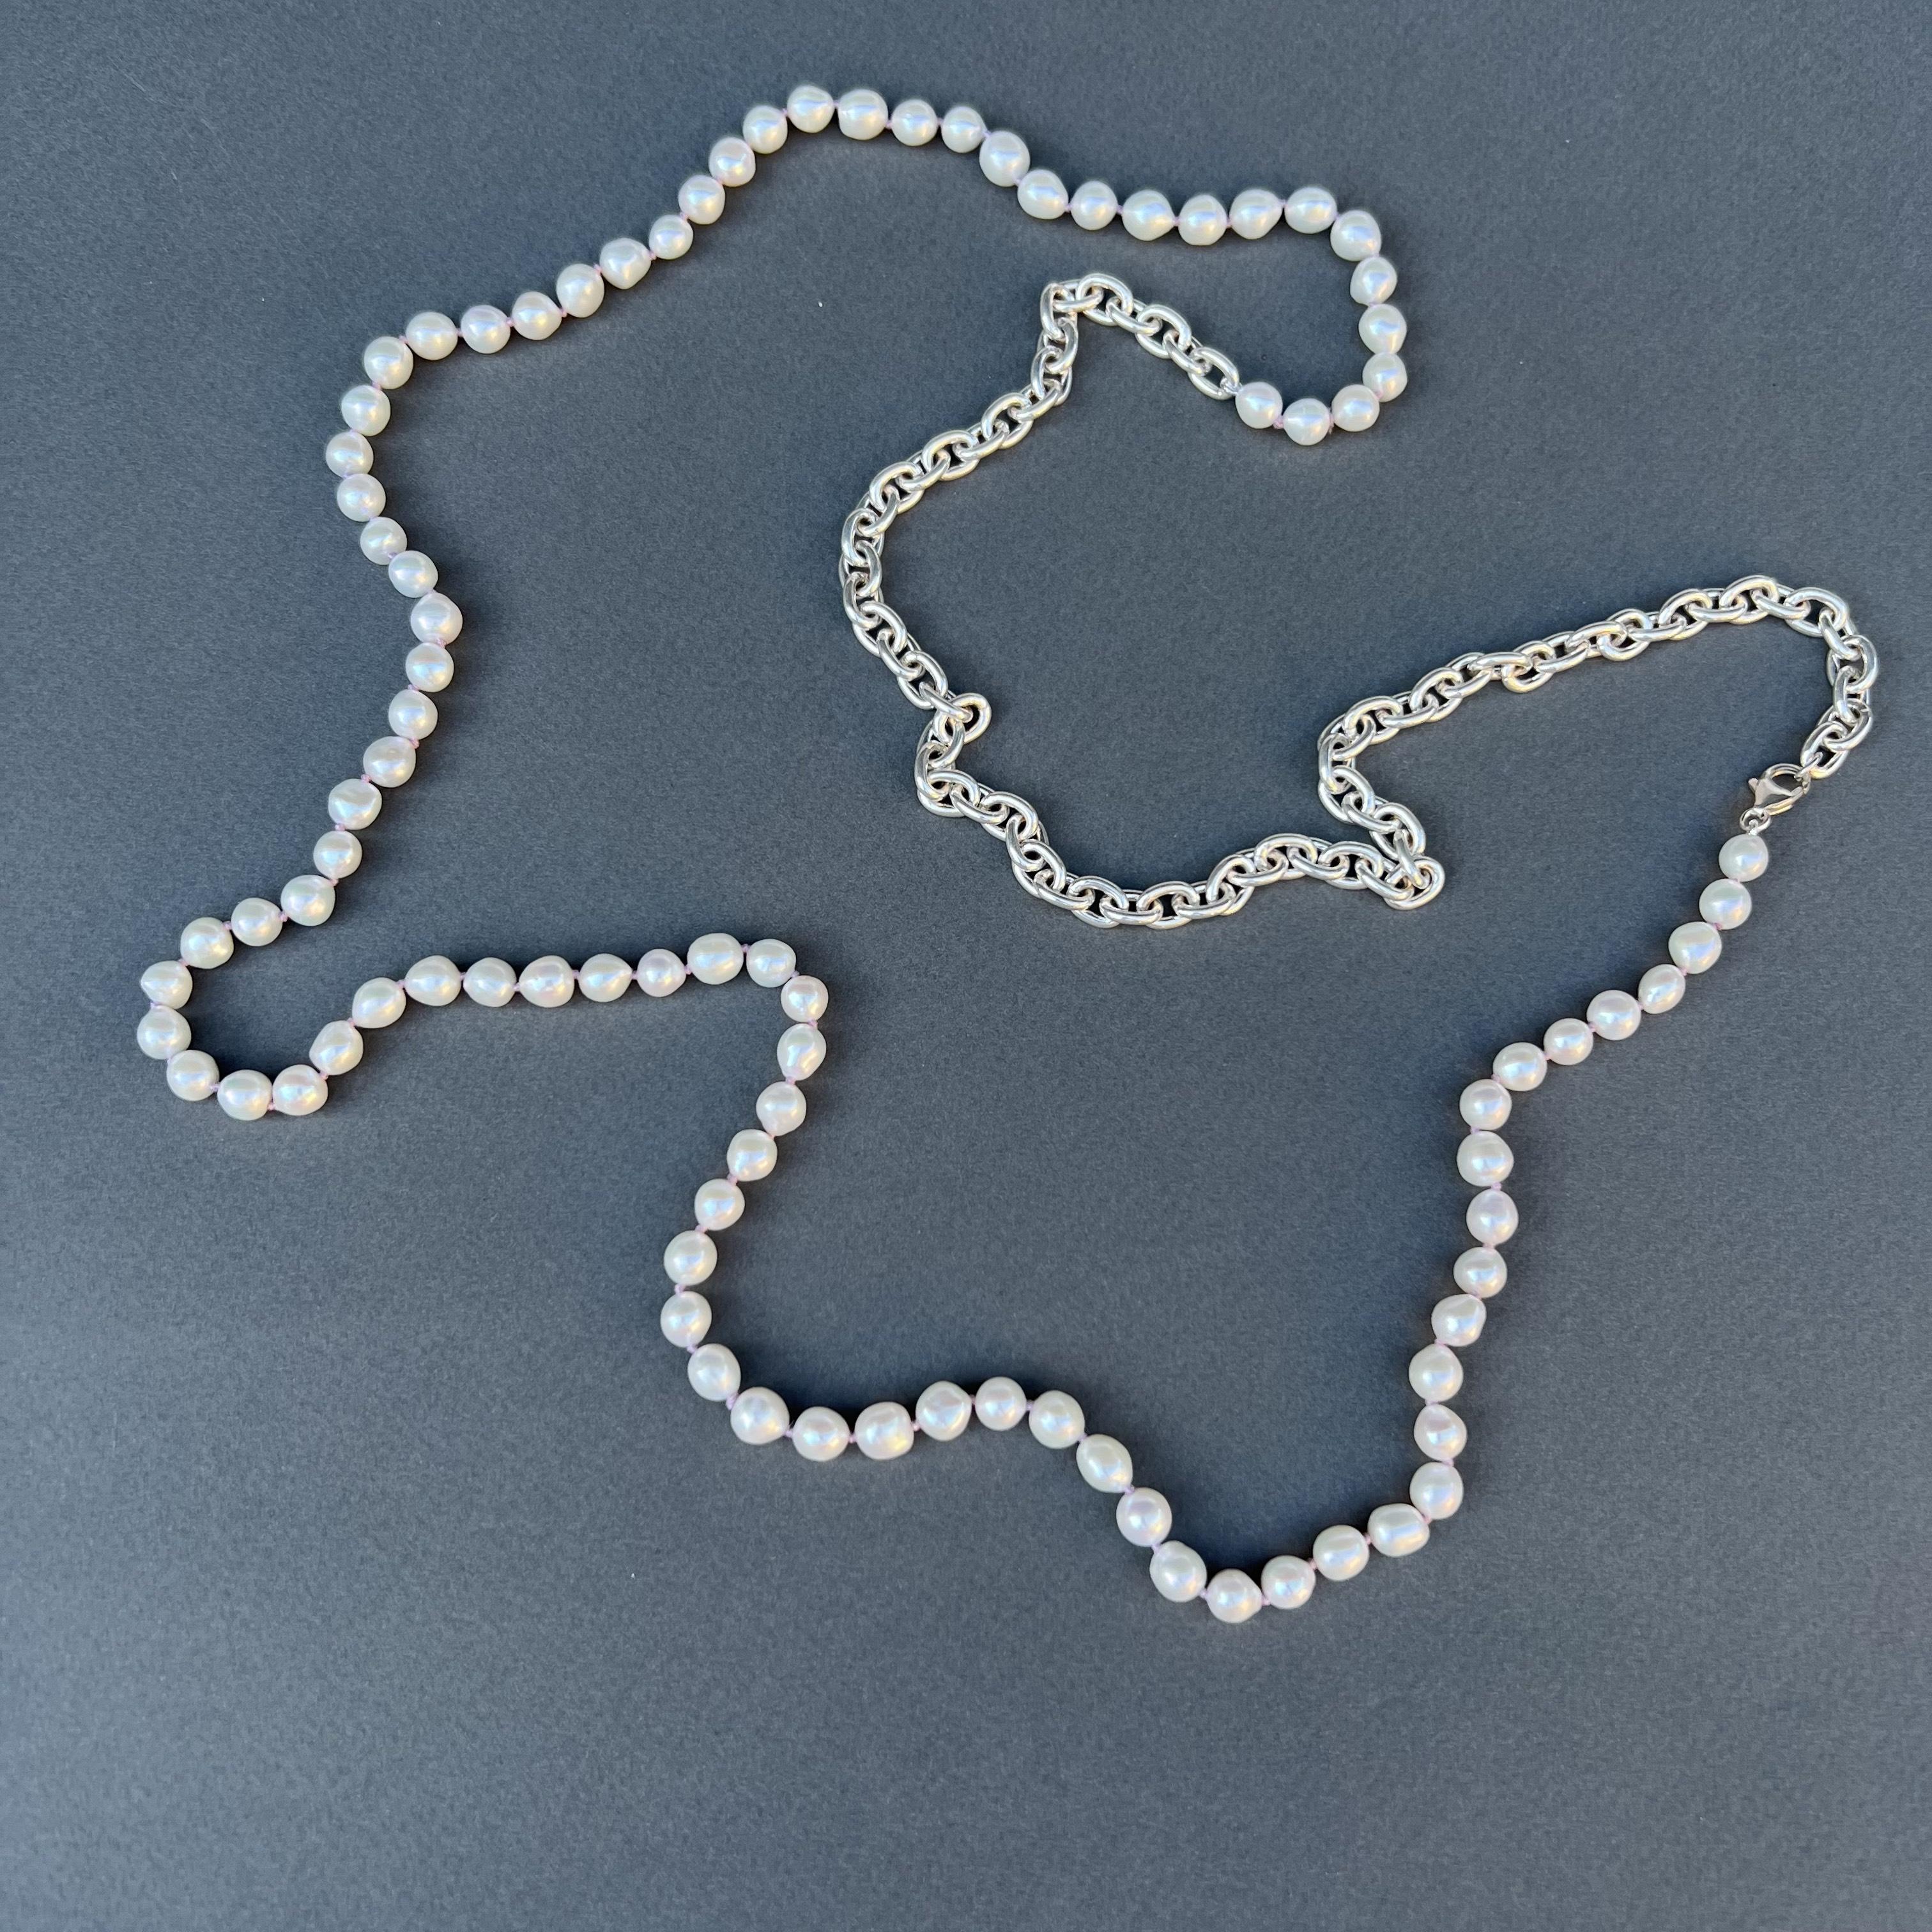 White Pearl Silver Chain Necklace J Dauphin For Sale 1